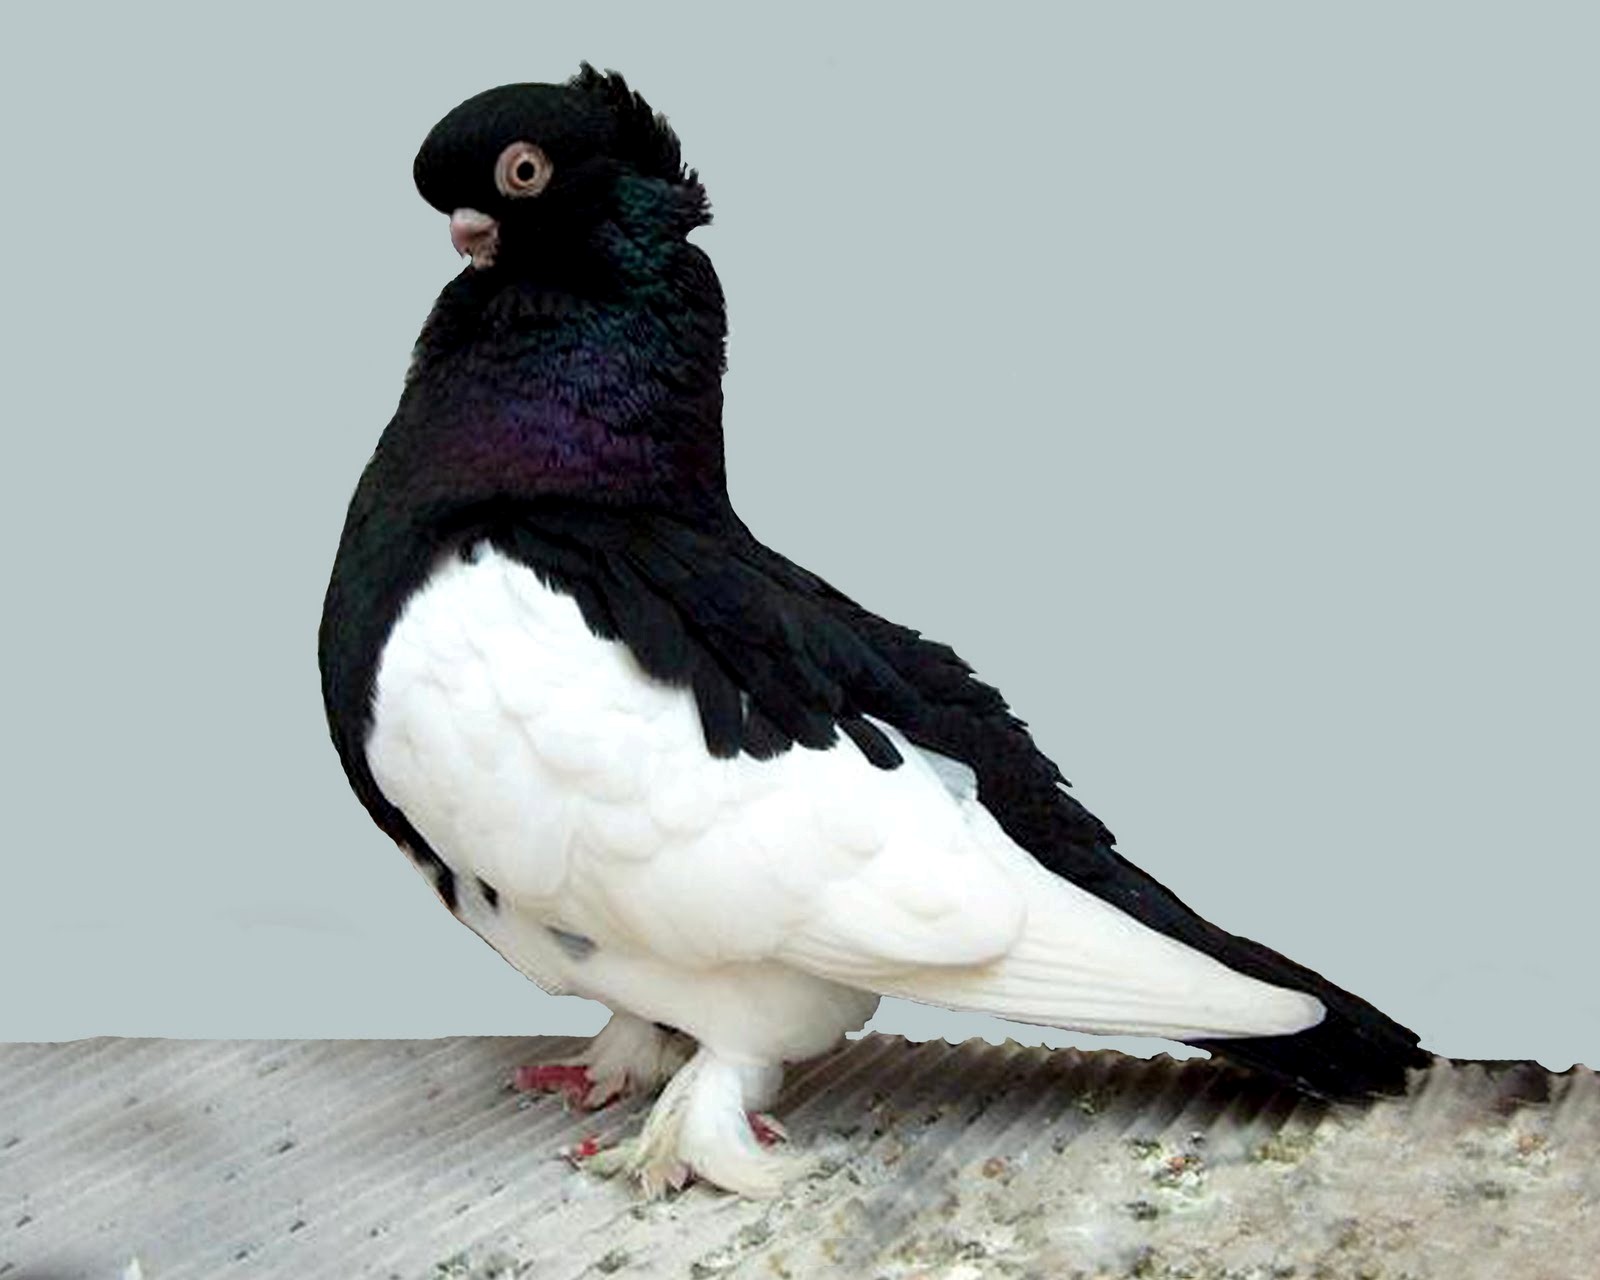 Black And White Bird Pigeon Pics Hd Wallpapers. Black And White